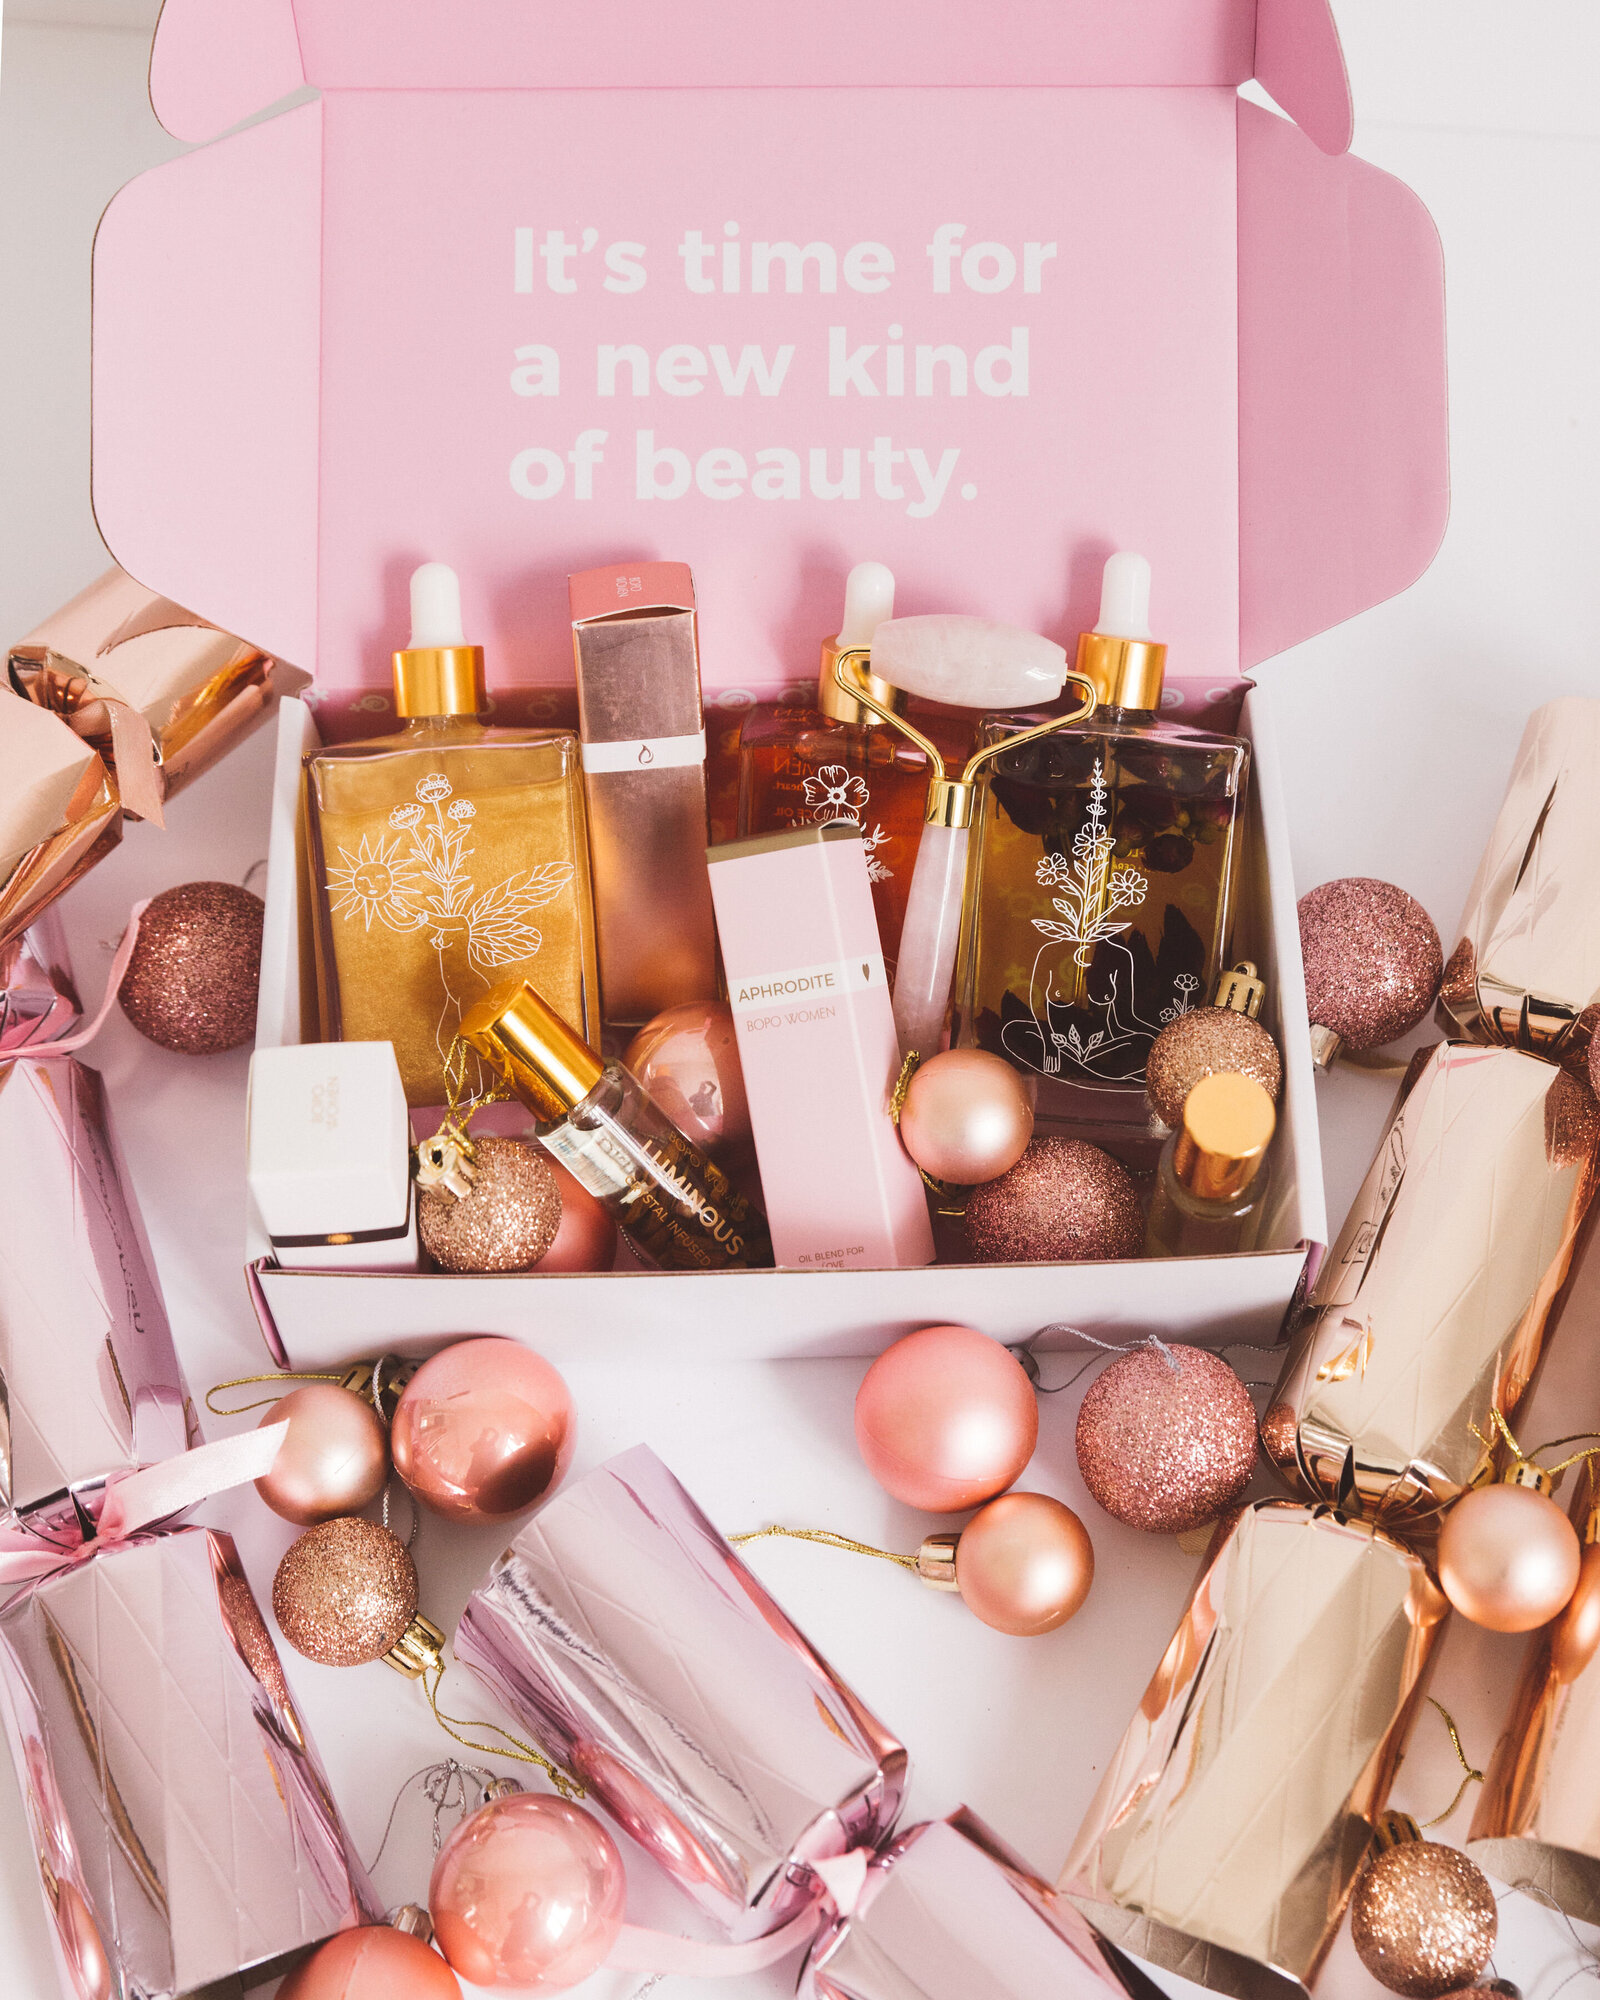 Chelsea Loren Product Photographer skincare roller oils in box styled product imagery for holidays